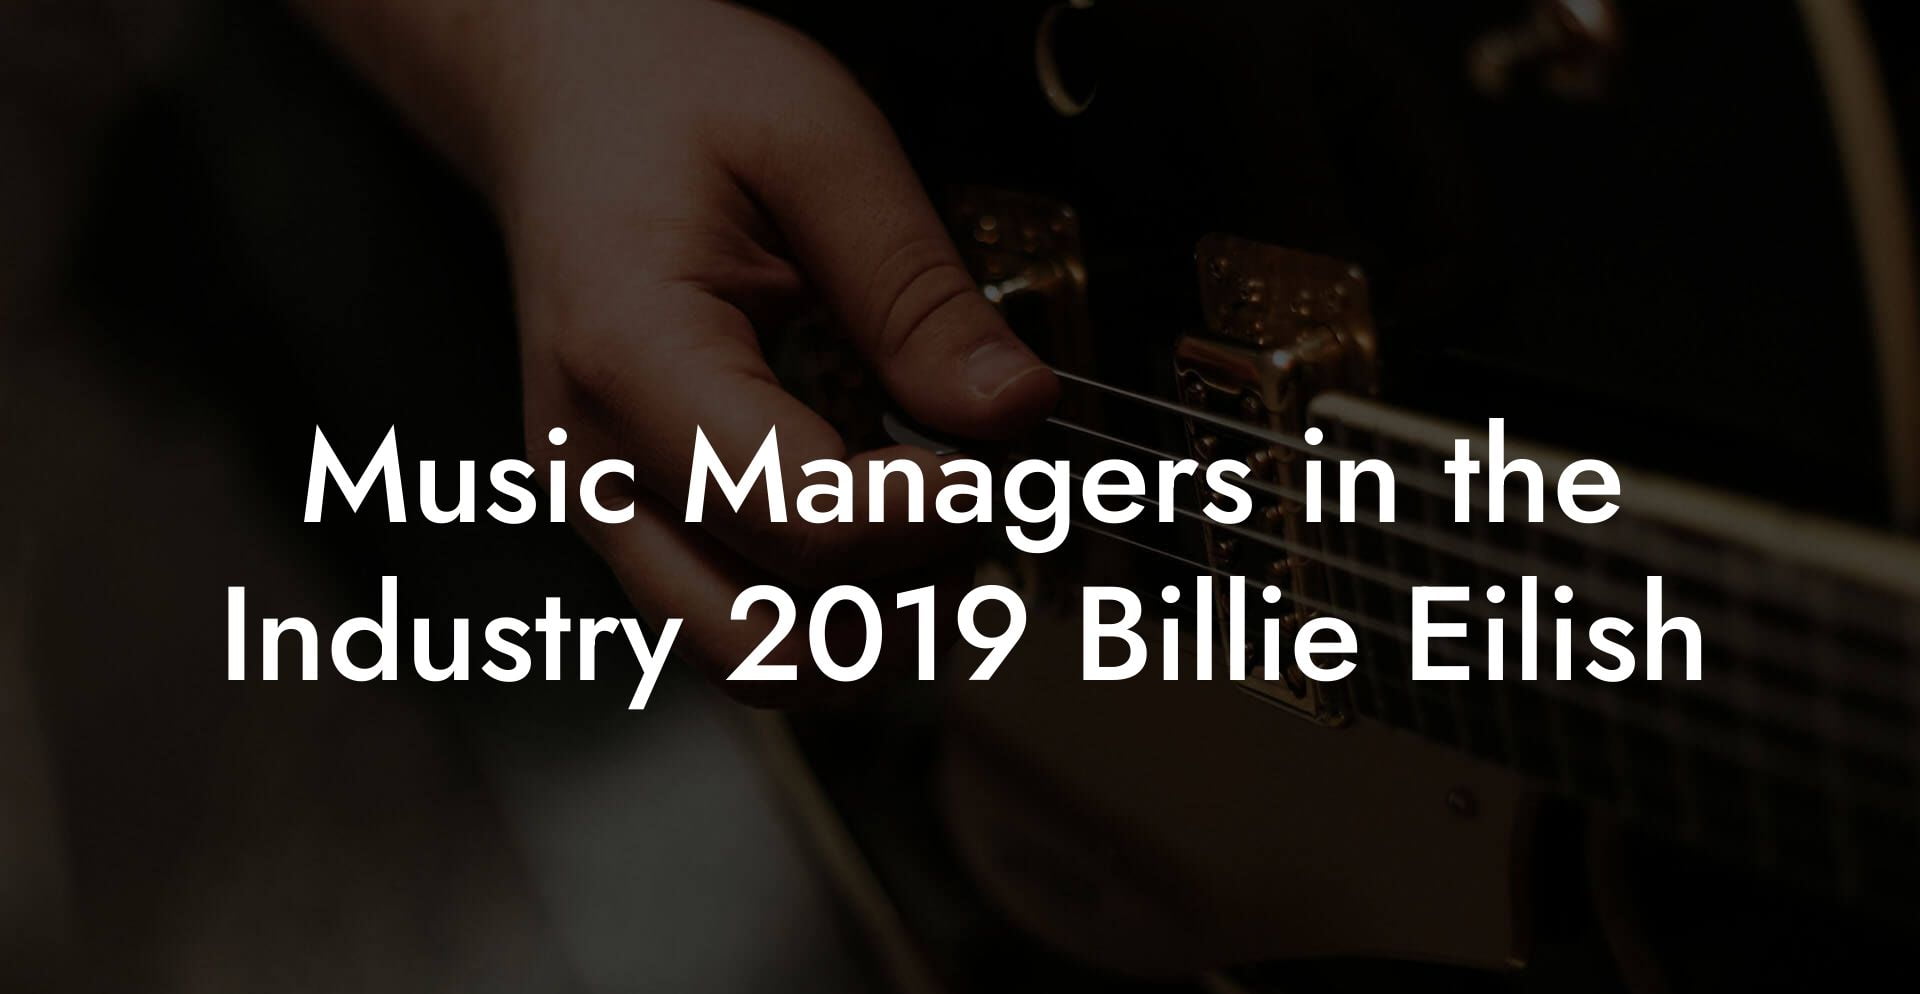 Music Managers in the Industry 2019 Billie Eilish